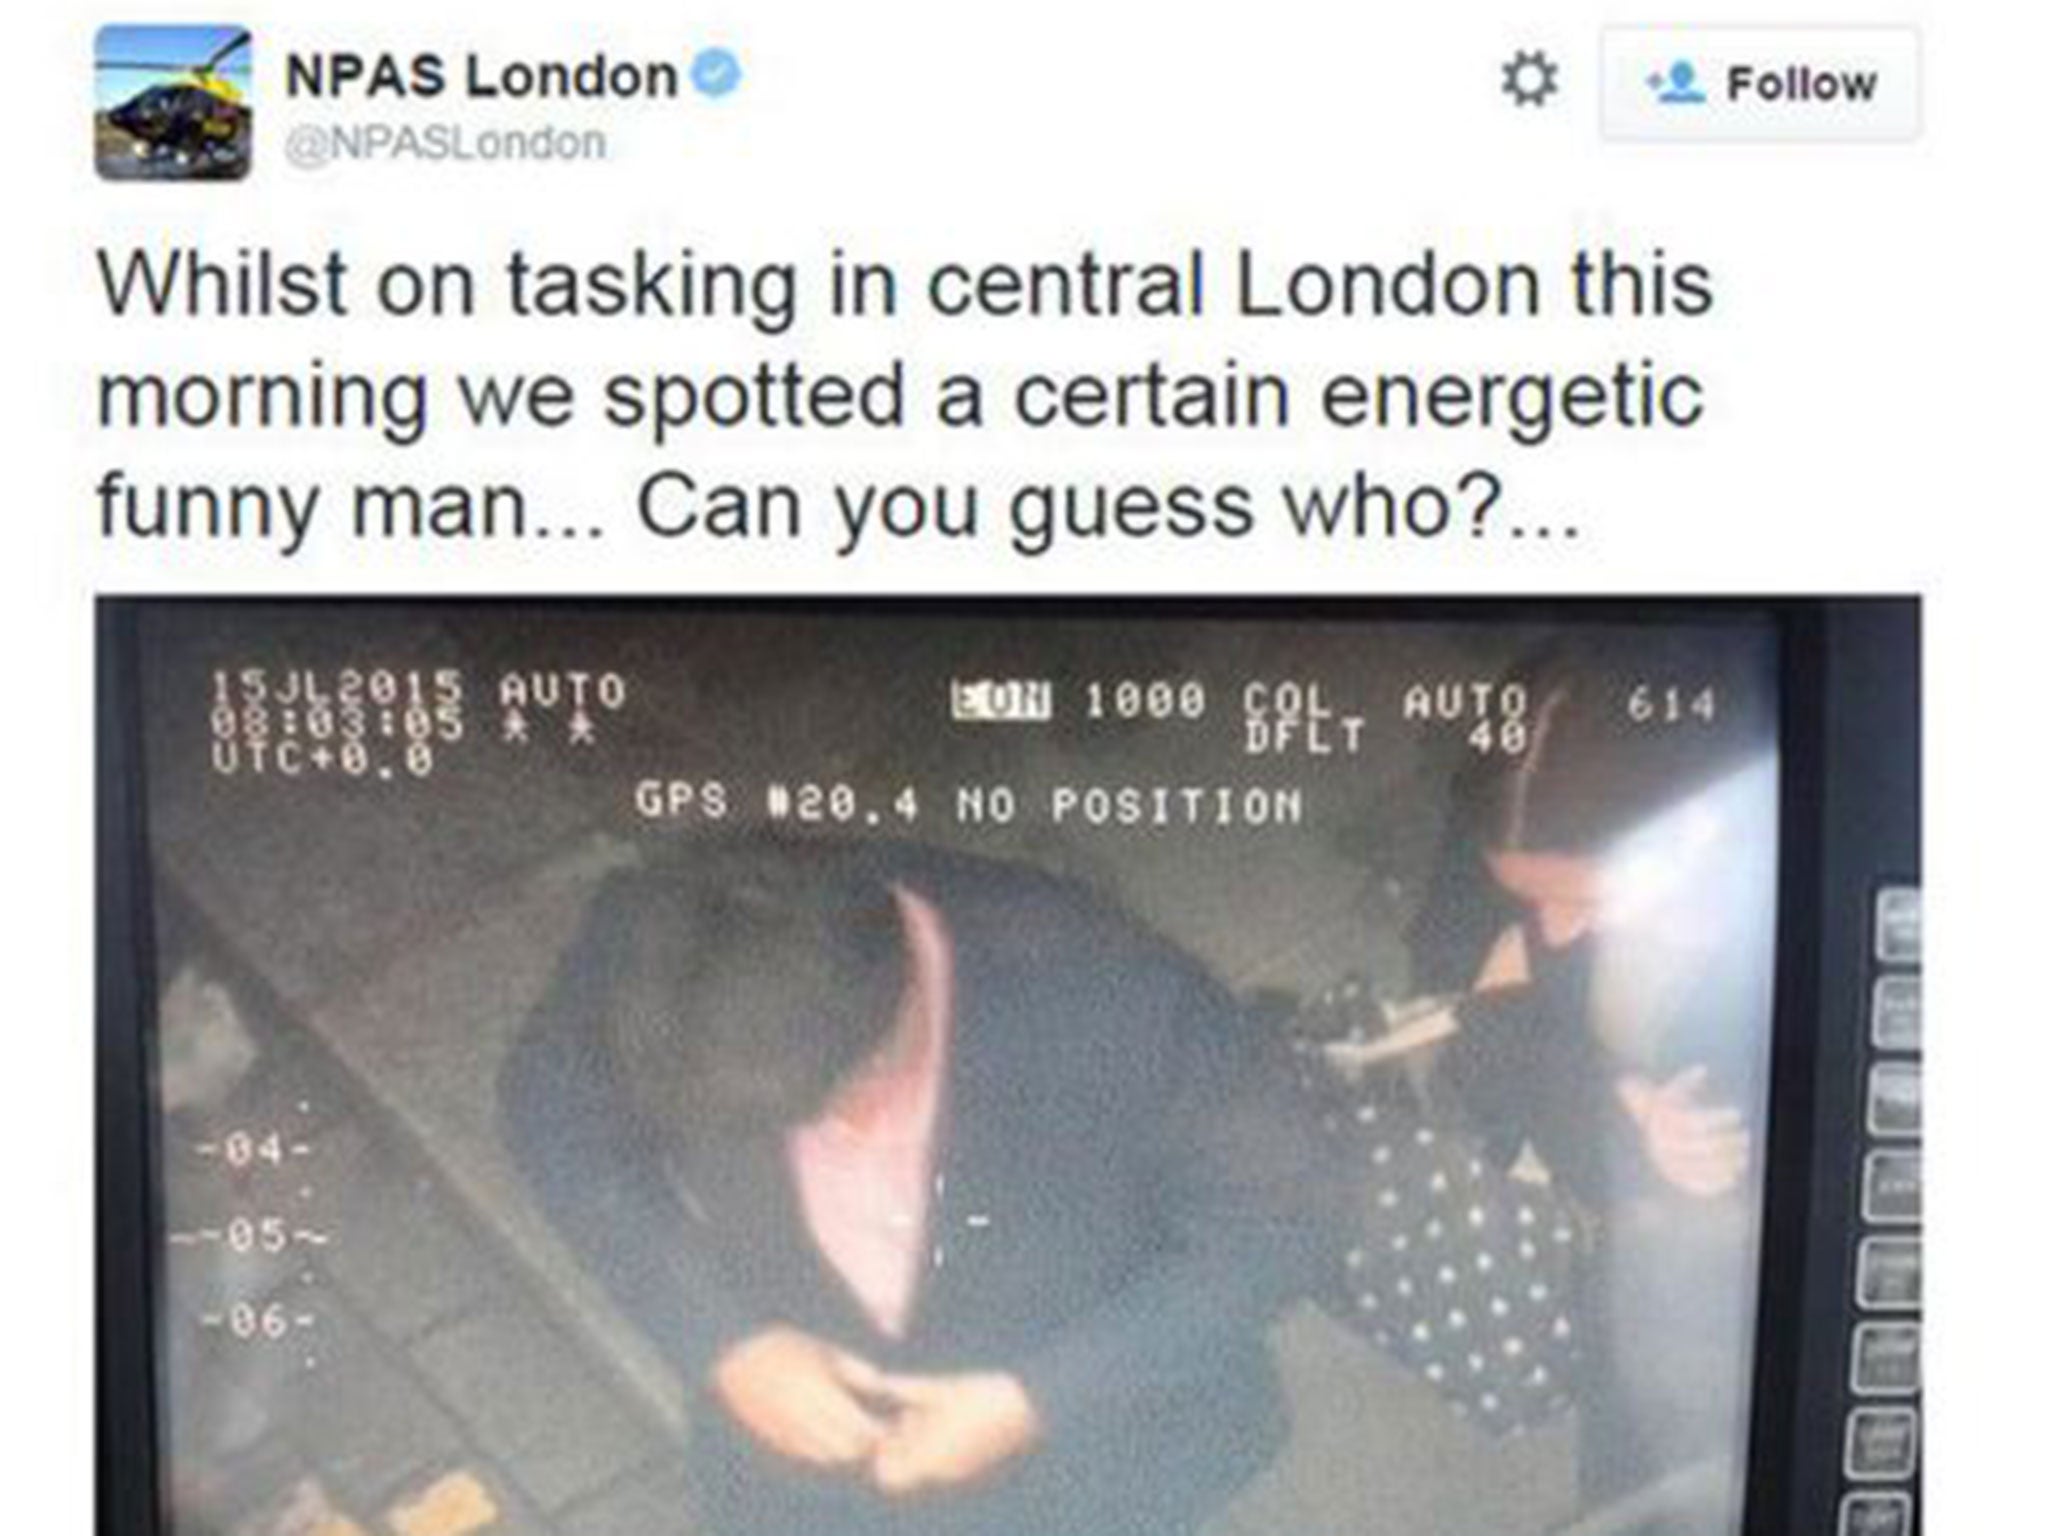 The original Twitter image posted by The National Police Air Service